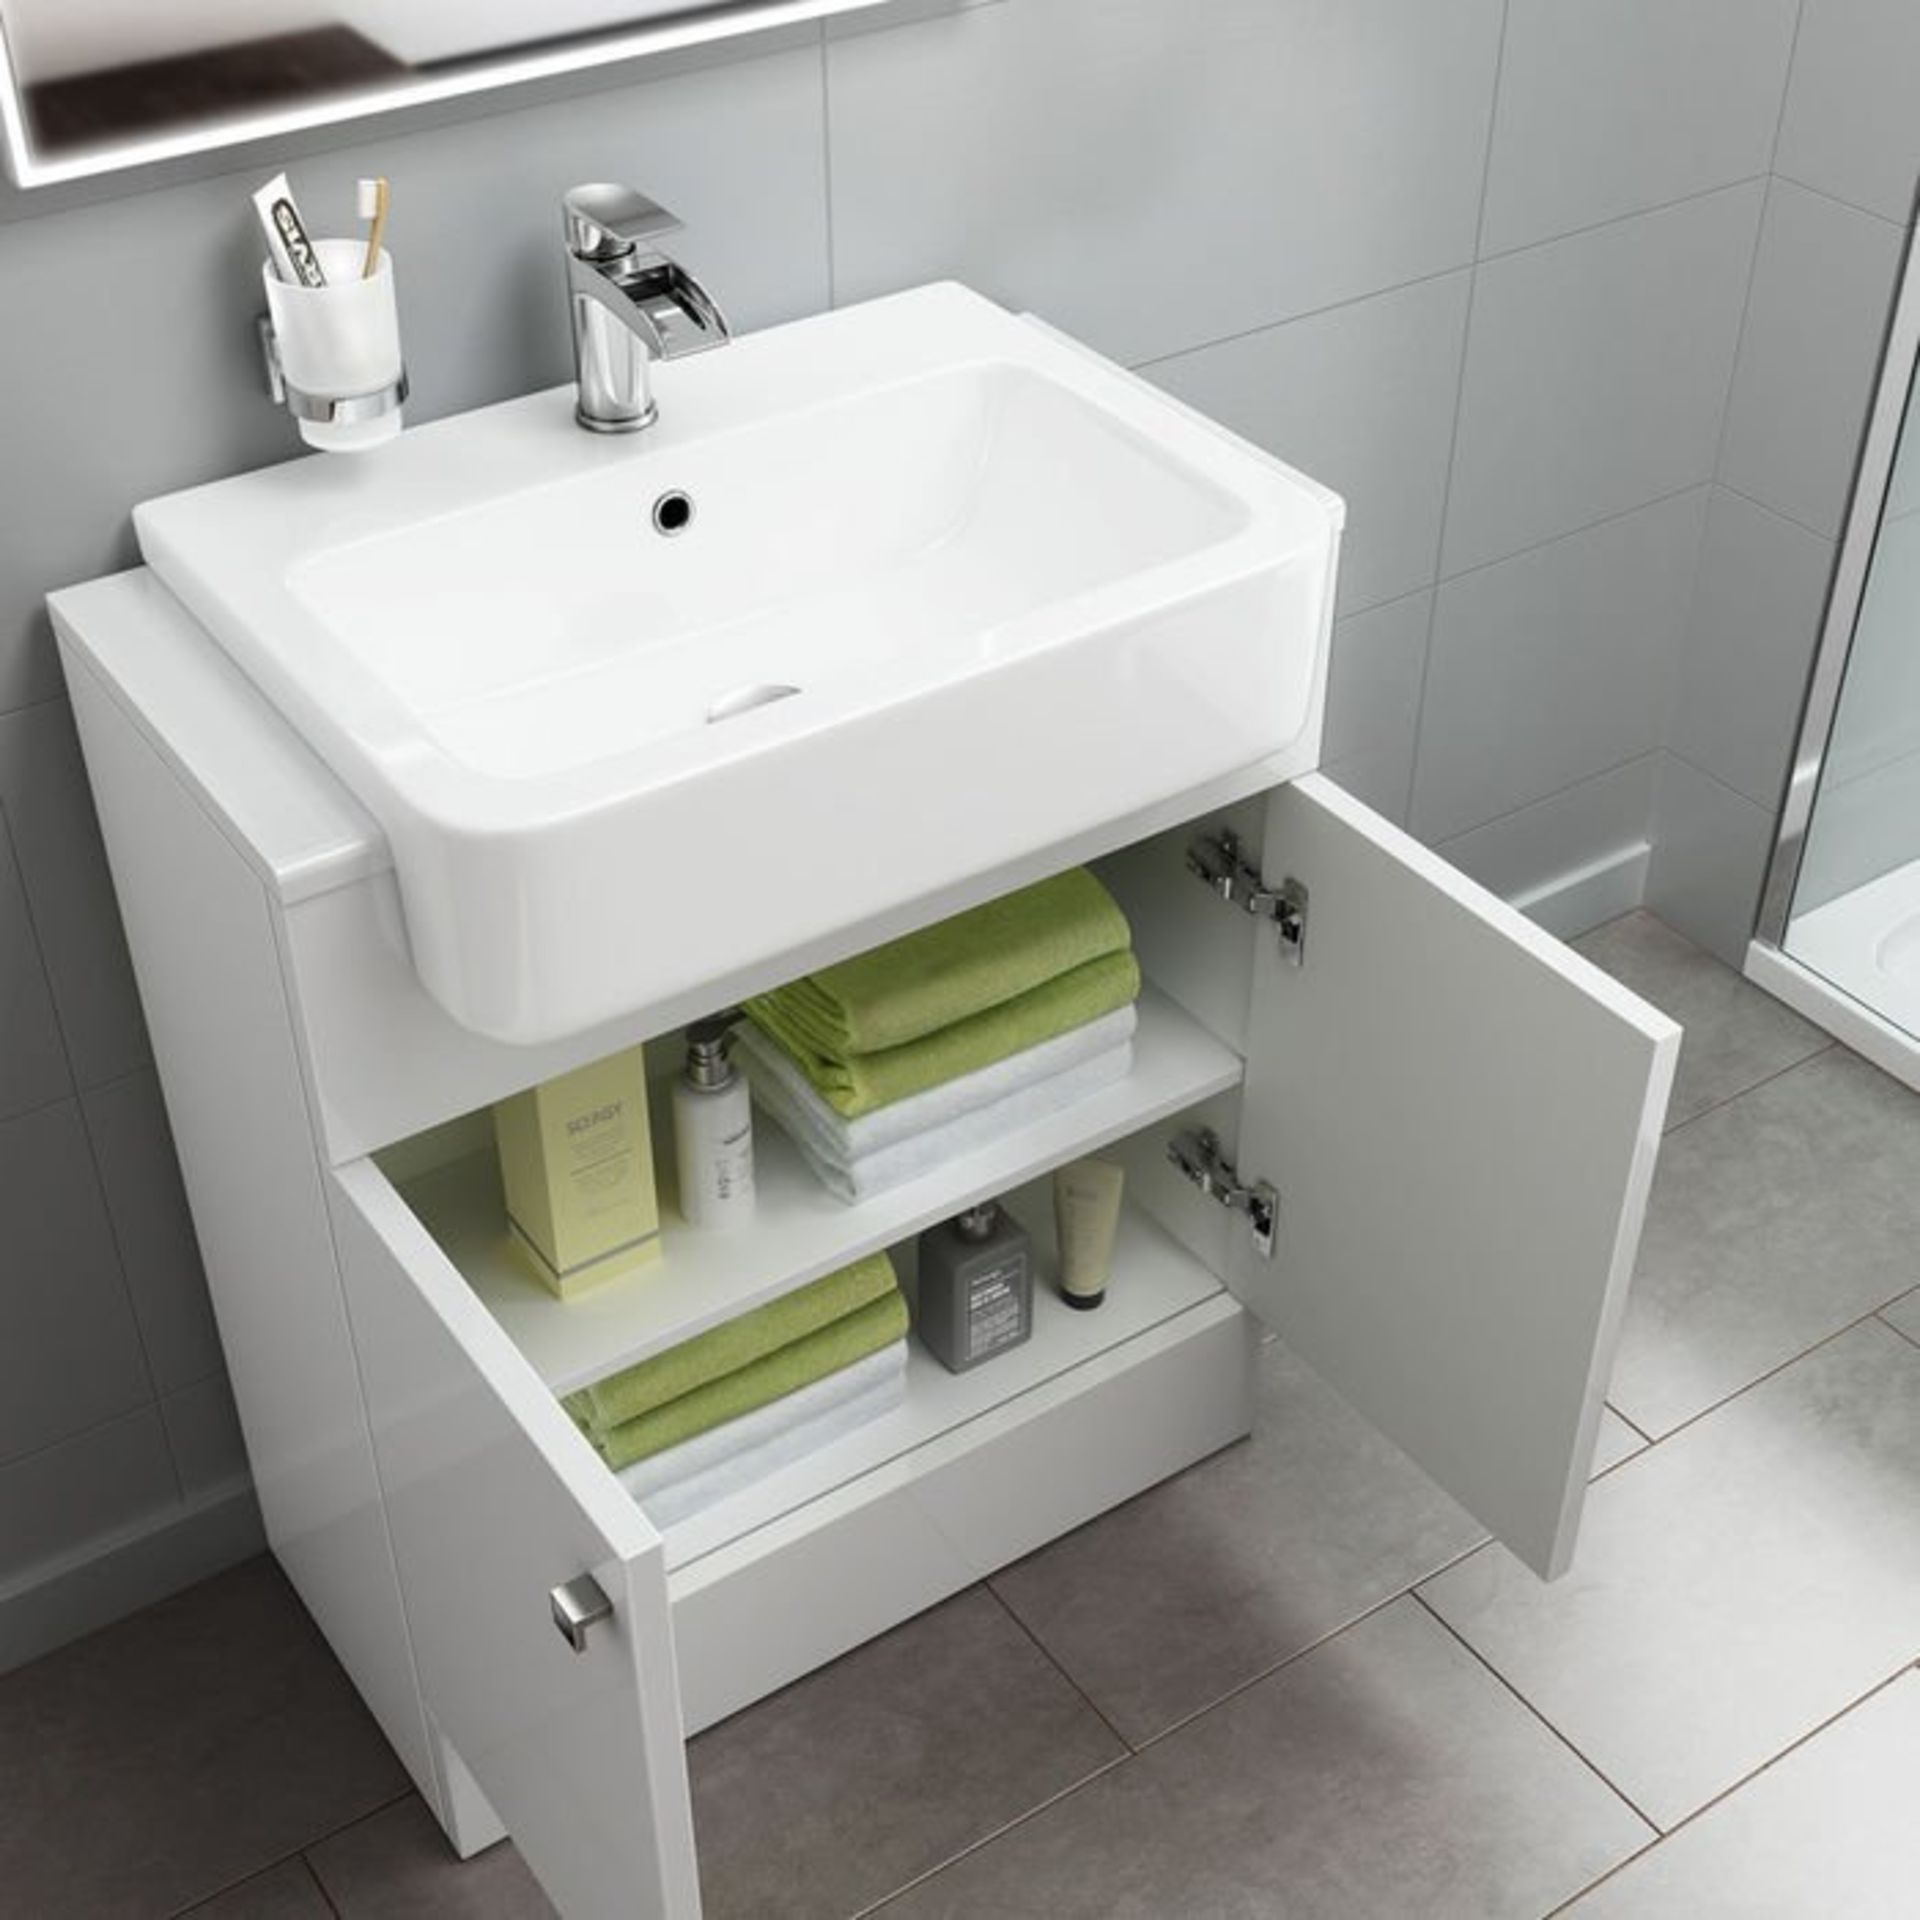 (H20) 660mm Harper Gloss White Basin Vanity Unit - Floor Standing RRP £449.99. COMES COMPLETE WITH - Image 3 of 5